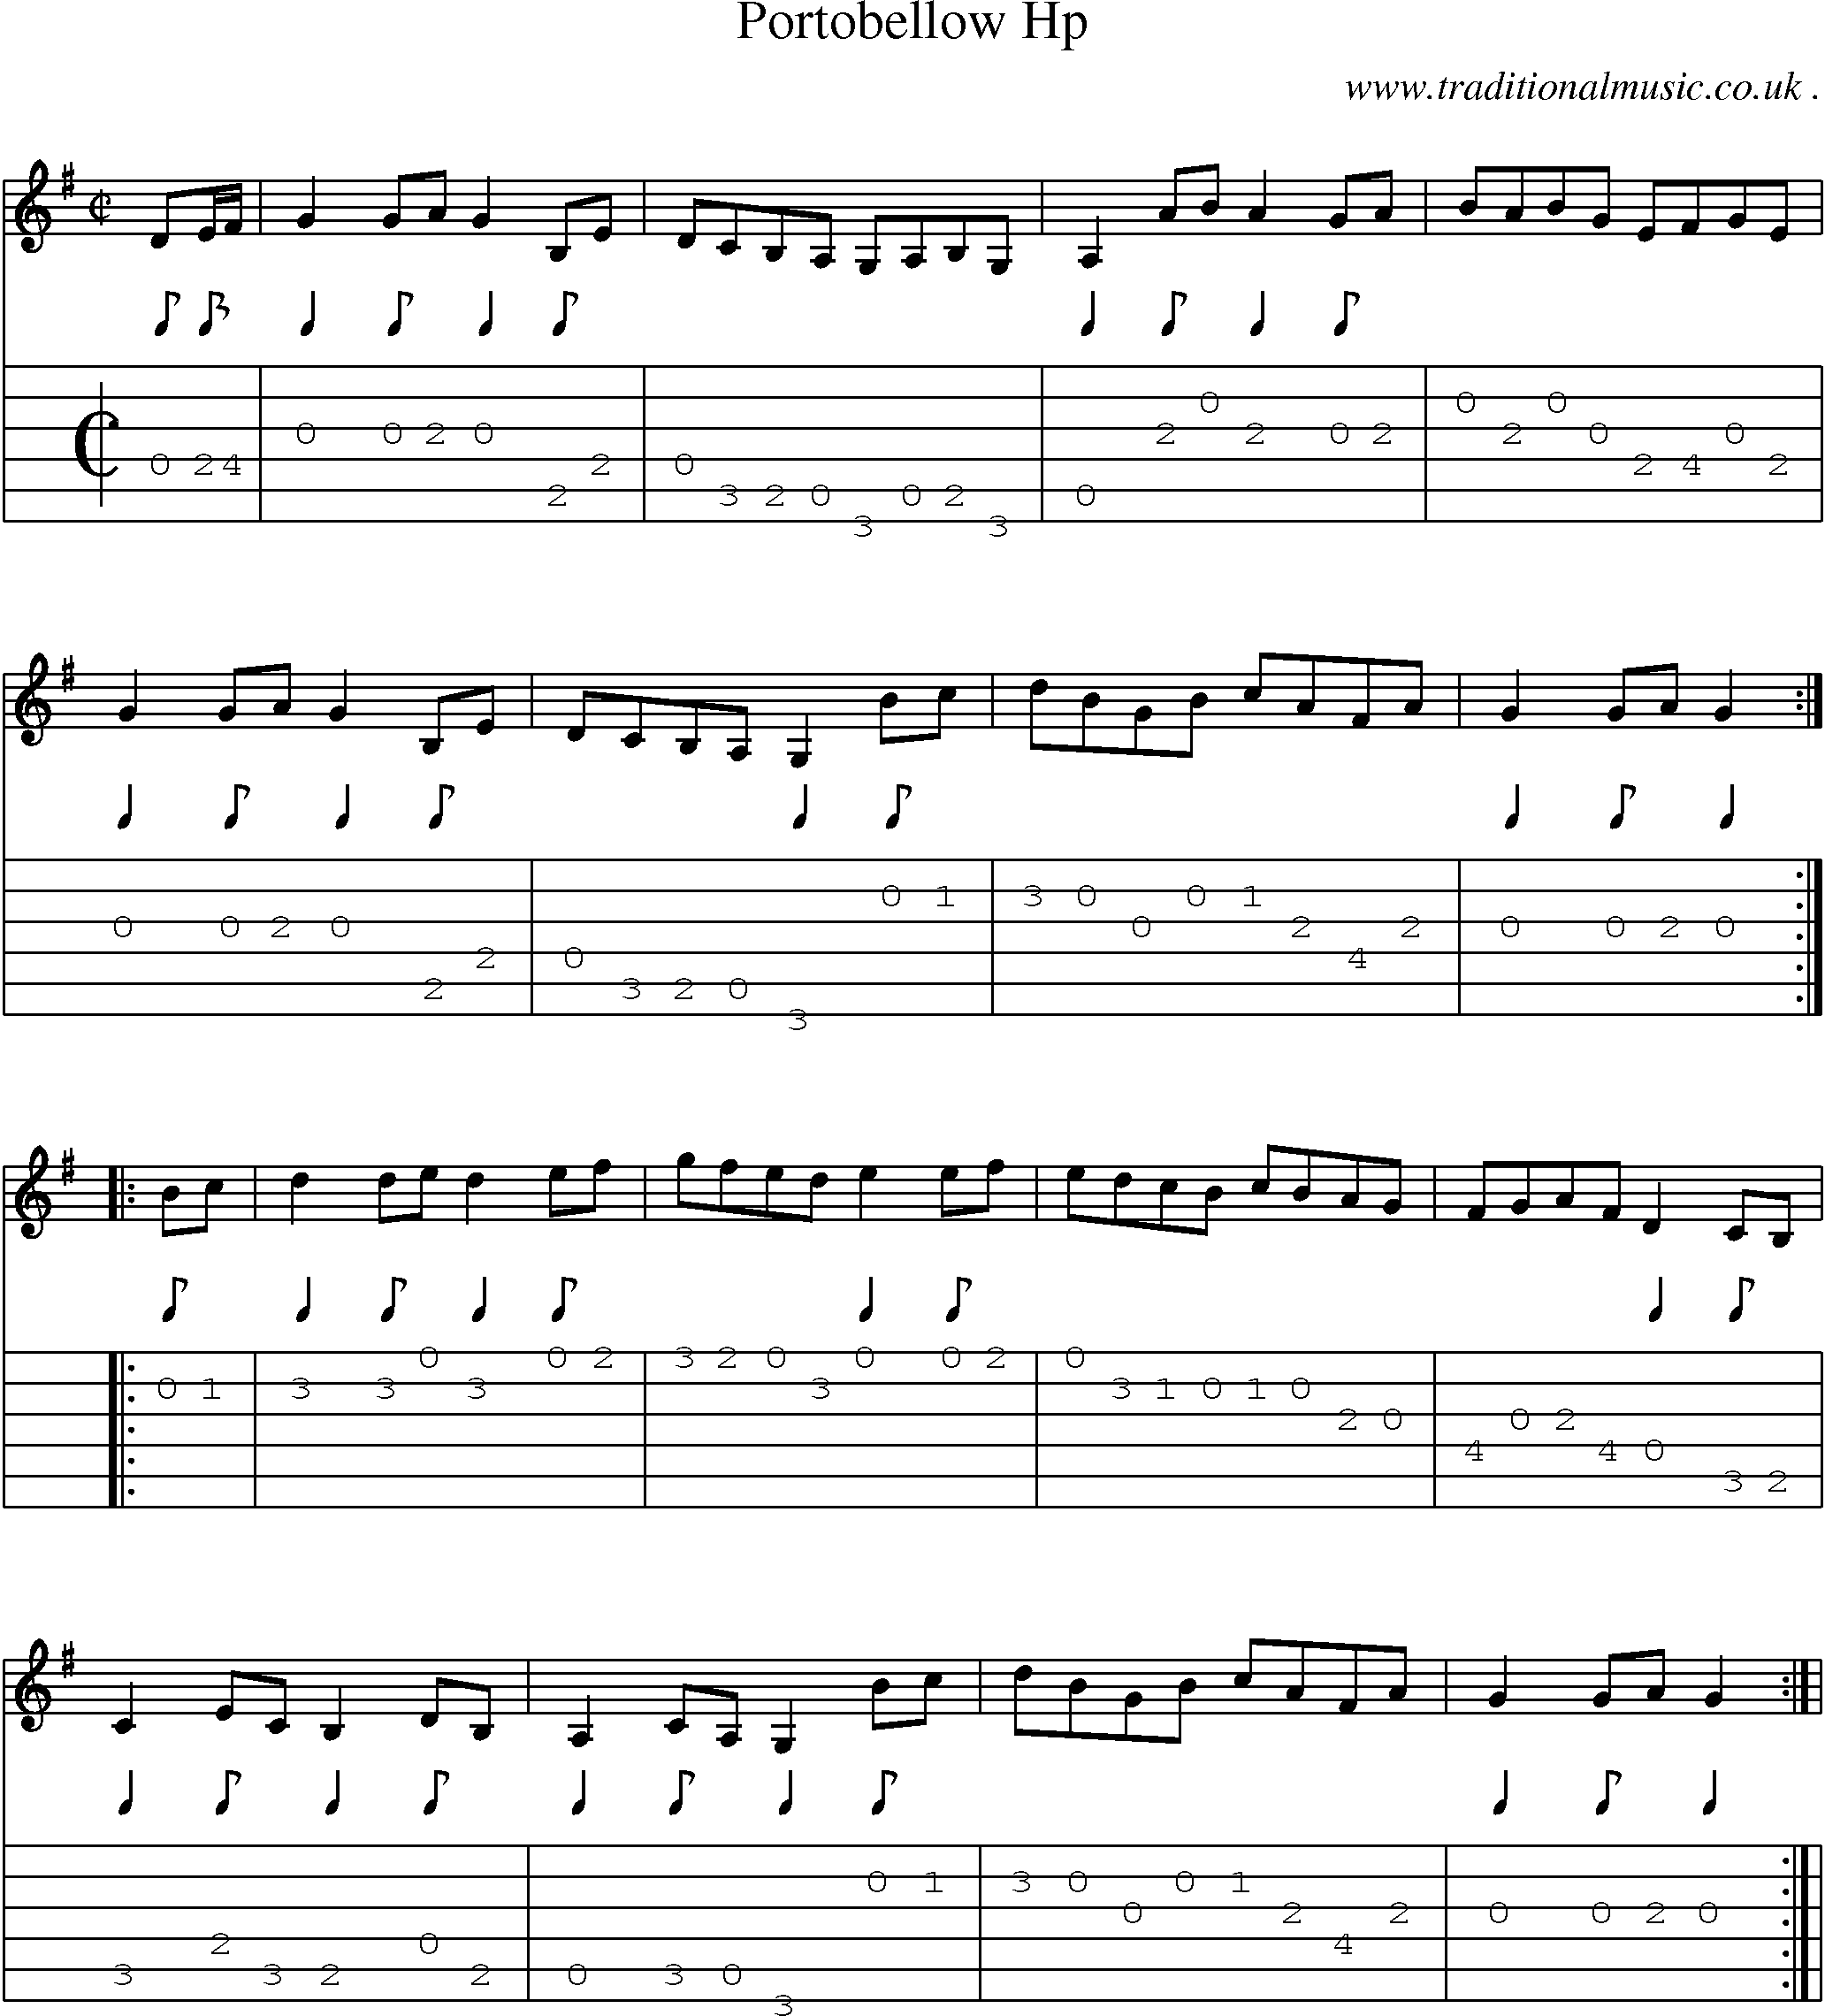 Sheet-Music and Guitar Tabs for Portobellow Hp